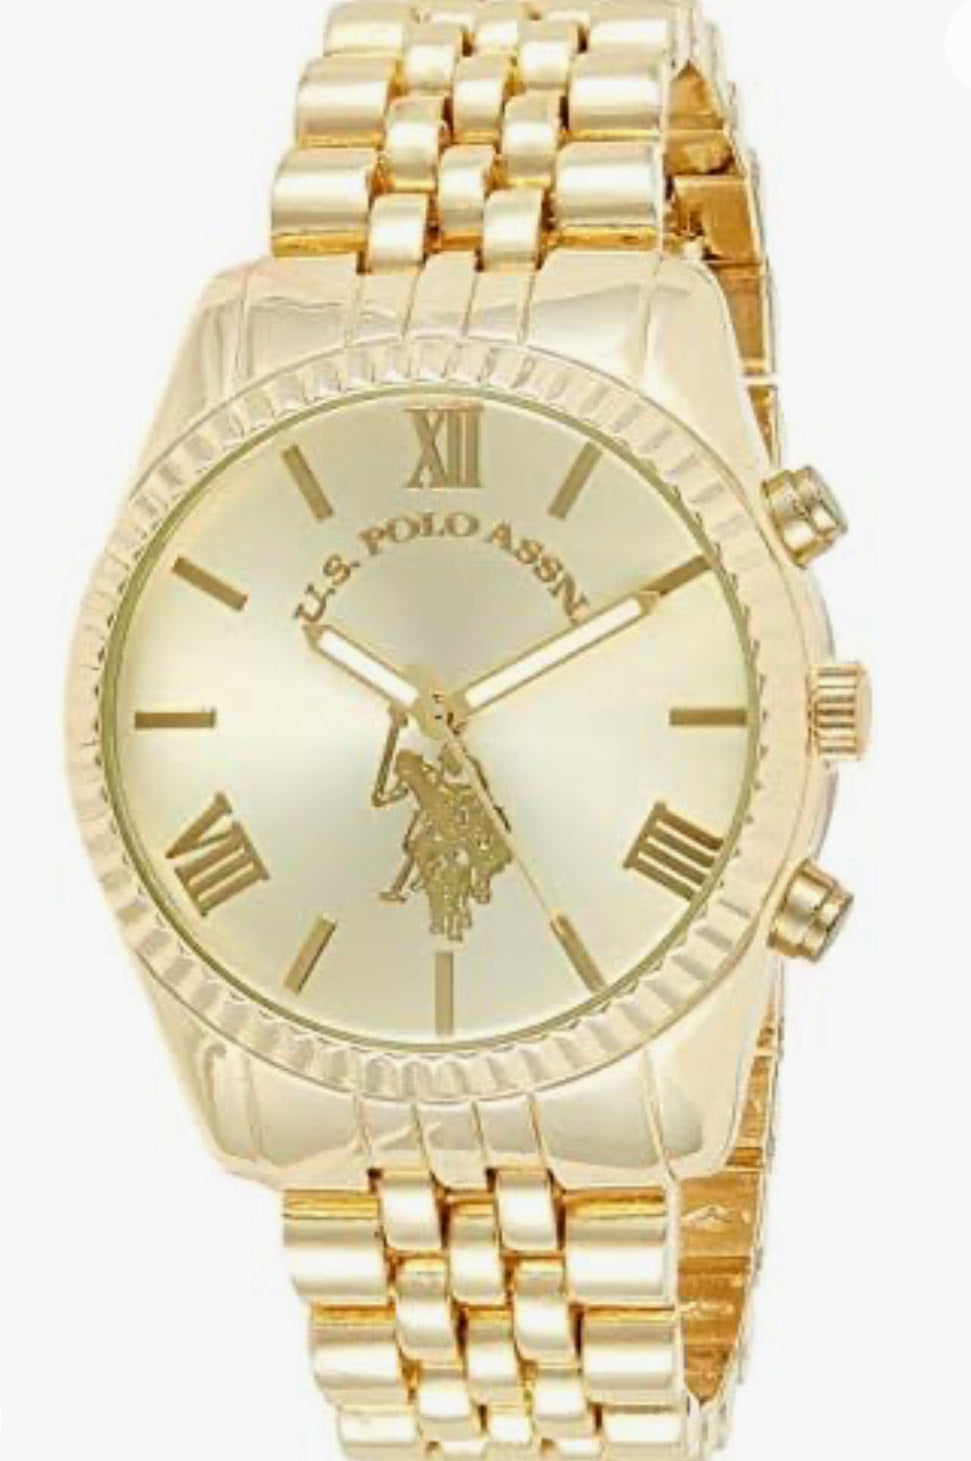 U.S. Polo Assn. Women's Quartz Watch, Analog Display and Gold Plated Strap